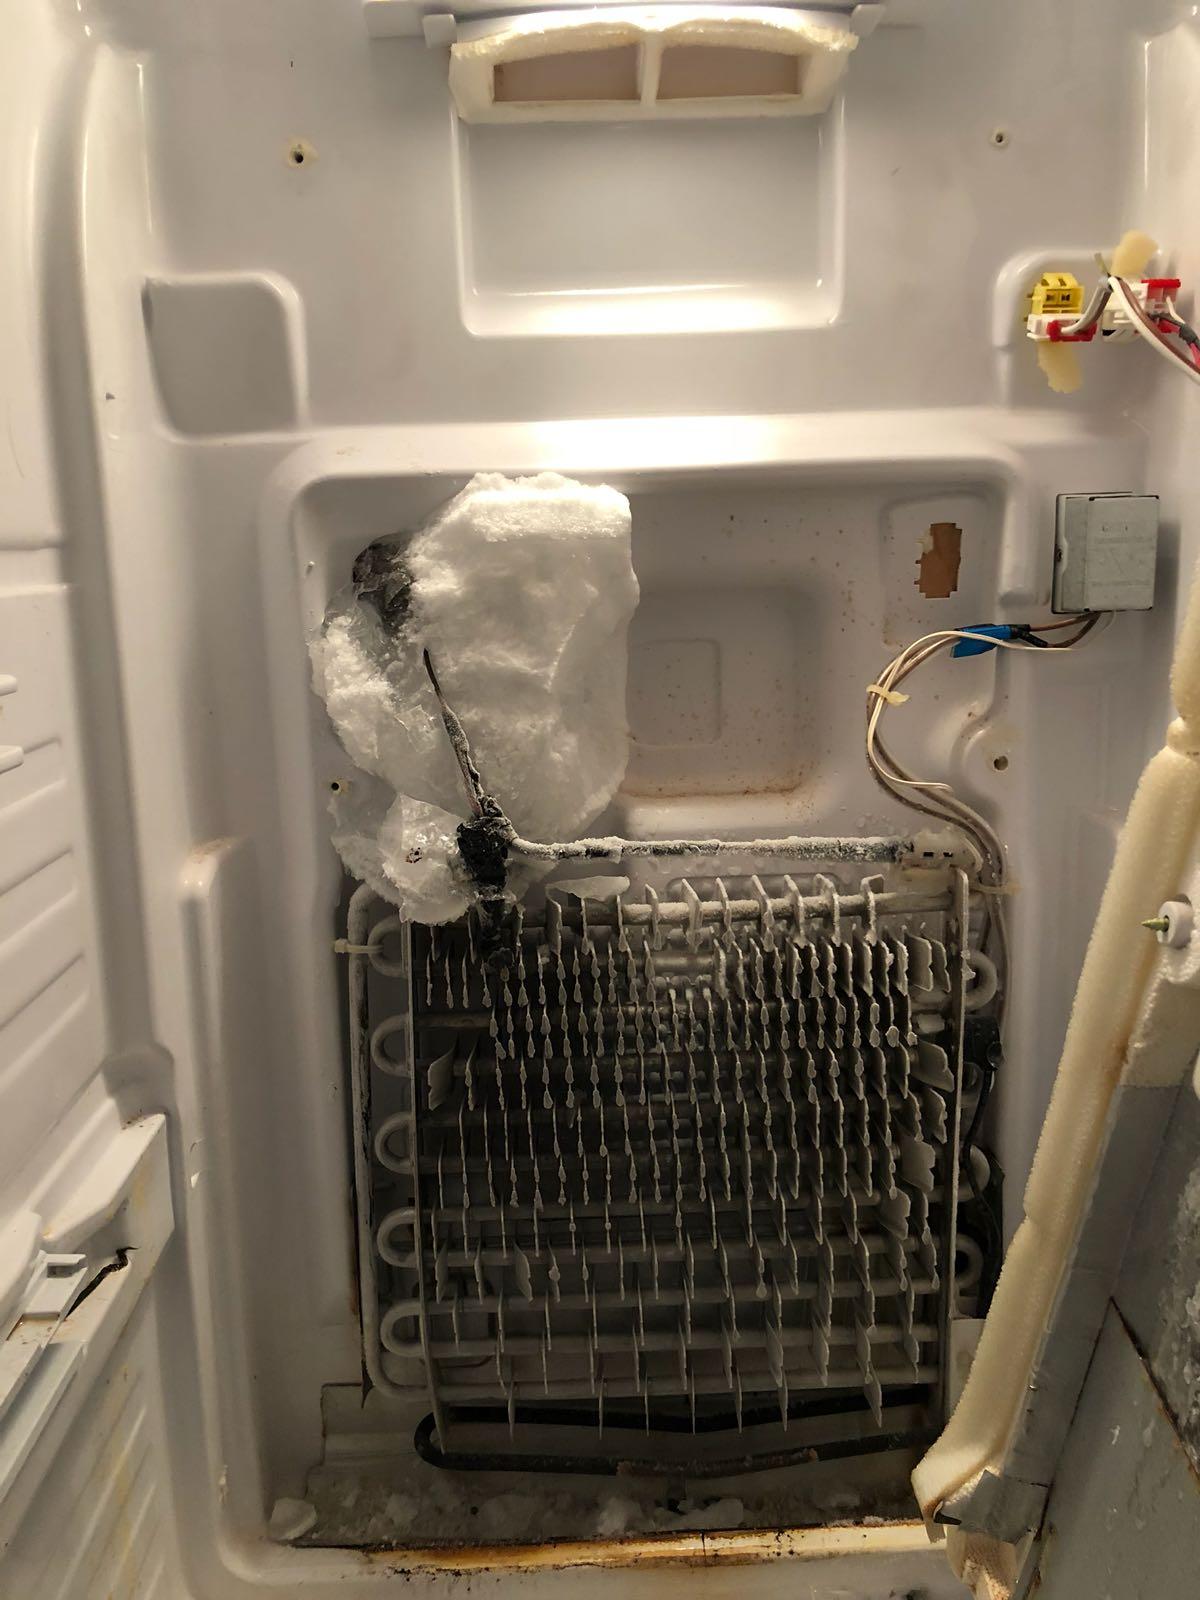 Picture of FixEm Appliance Repair fixed this Samsung refrigerator which wasn't cooling properly. - FixEm Appliance Repair